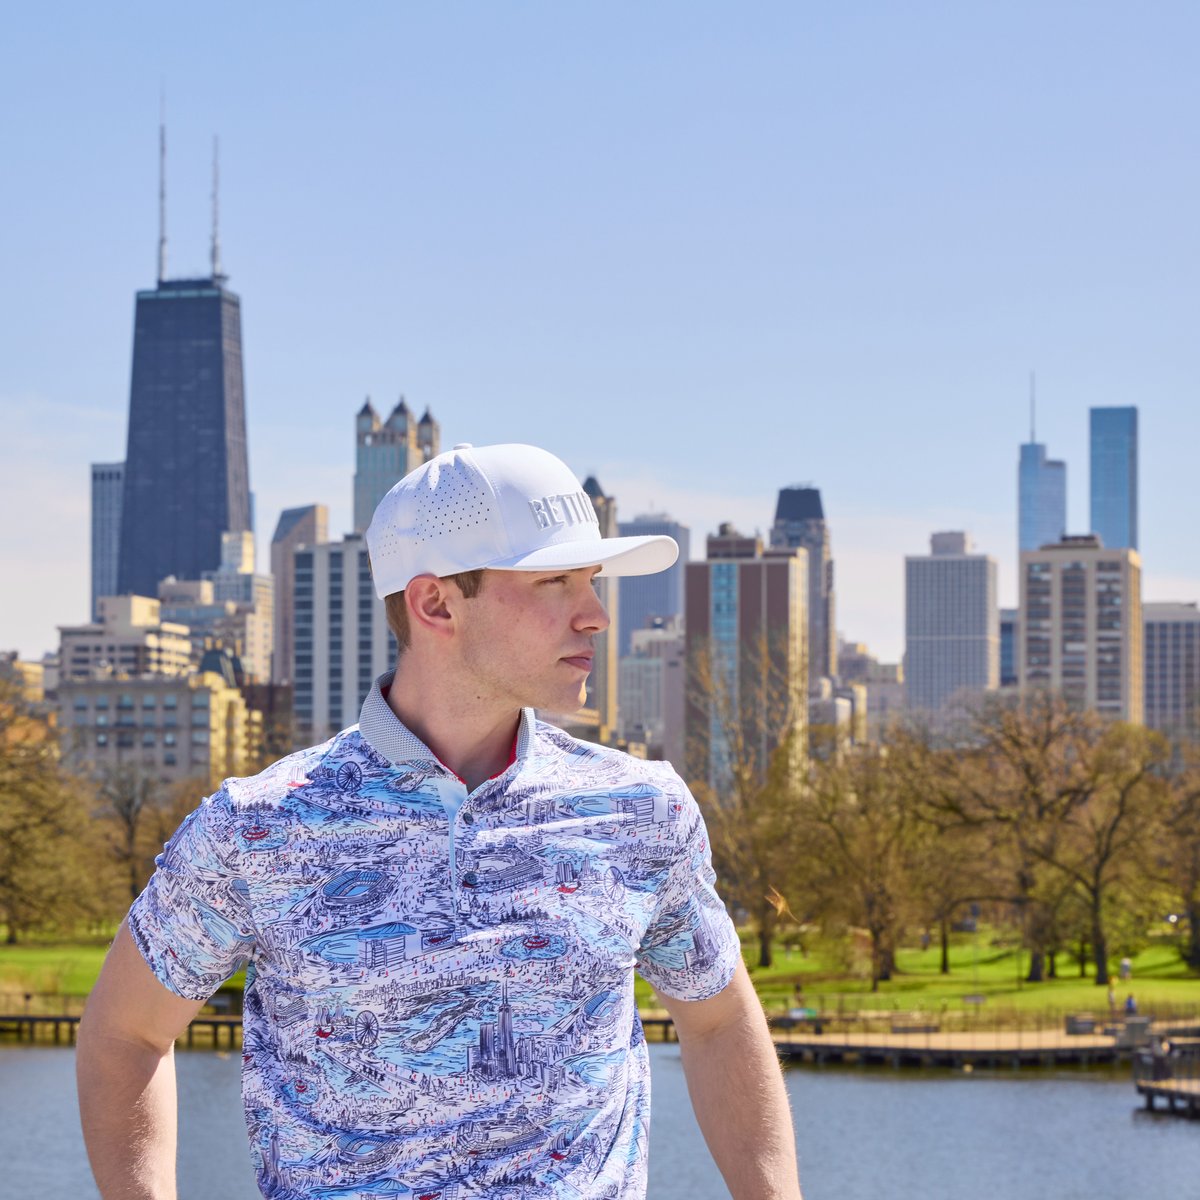 We teamed up with @GreysonClothier to create a custom print inspired by Chicago landmarks. This exclusive Bettinardi x Greyson polo is ready to wear in men’s and women’s sizes. Also available is a matching Chicago throw blanket - online at bettinardi.com. #bettinardi